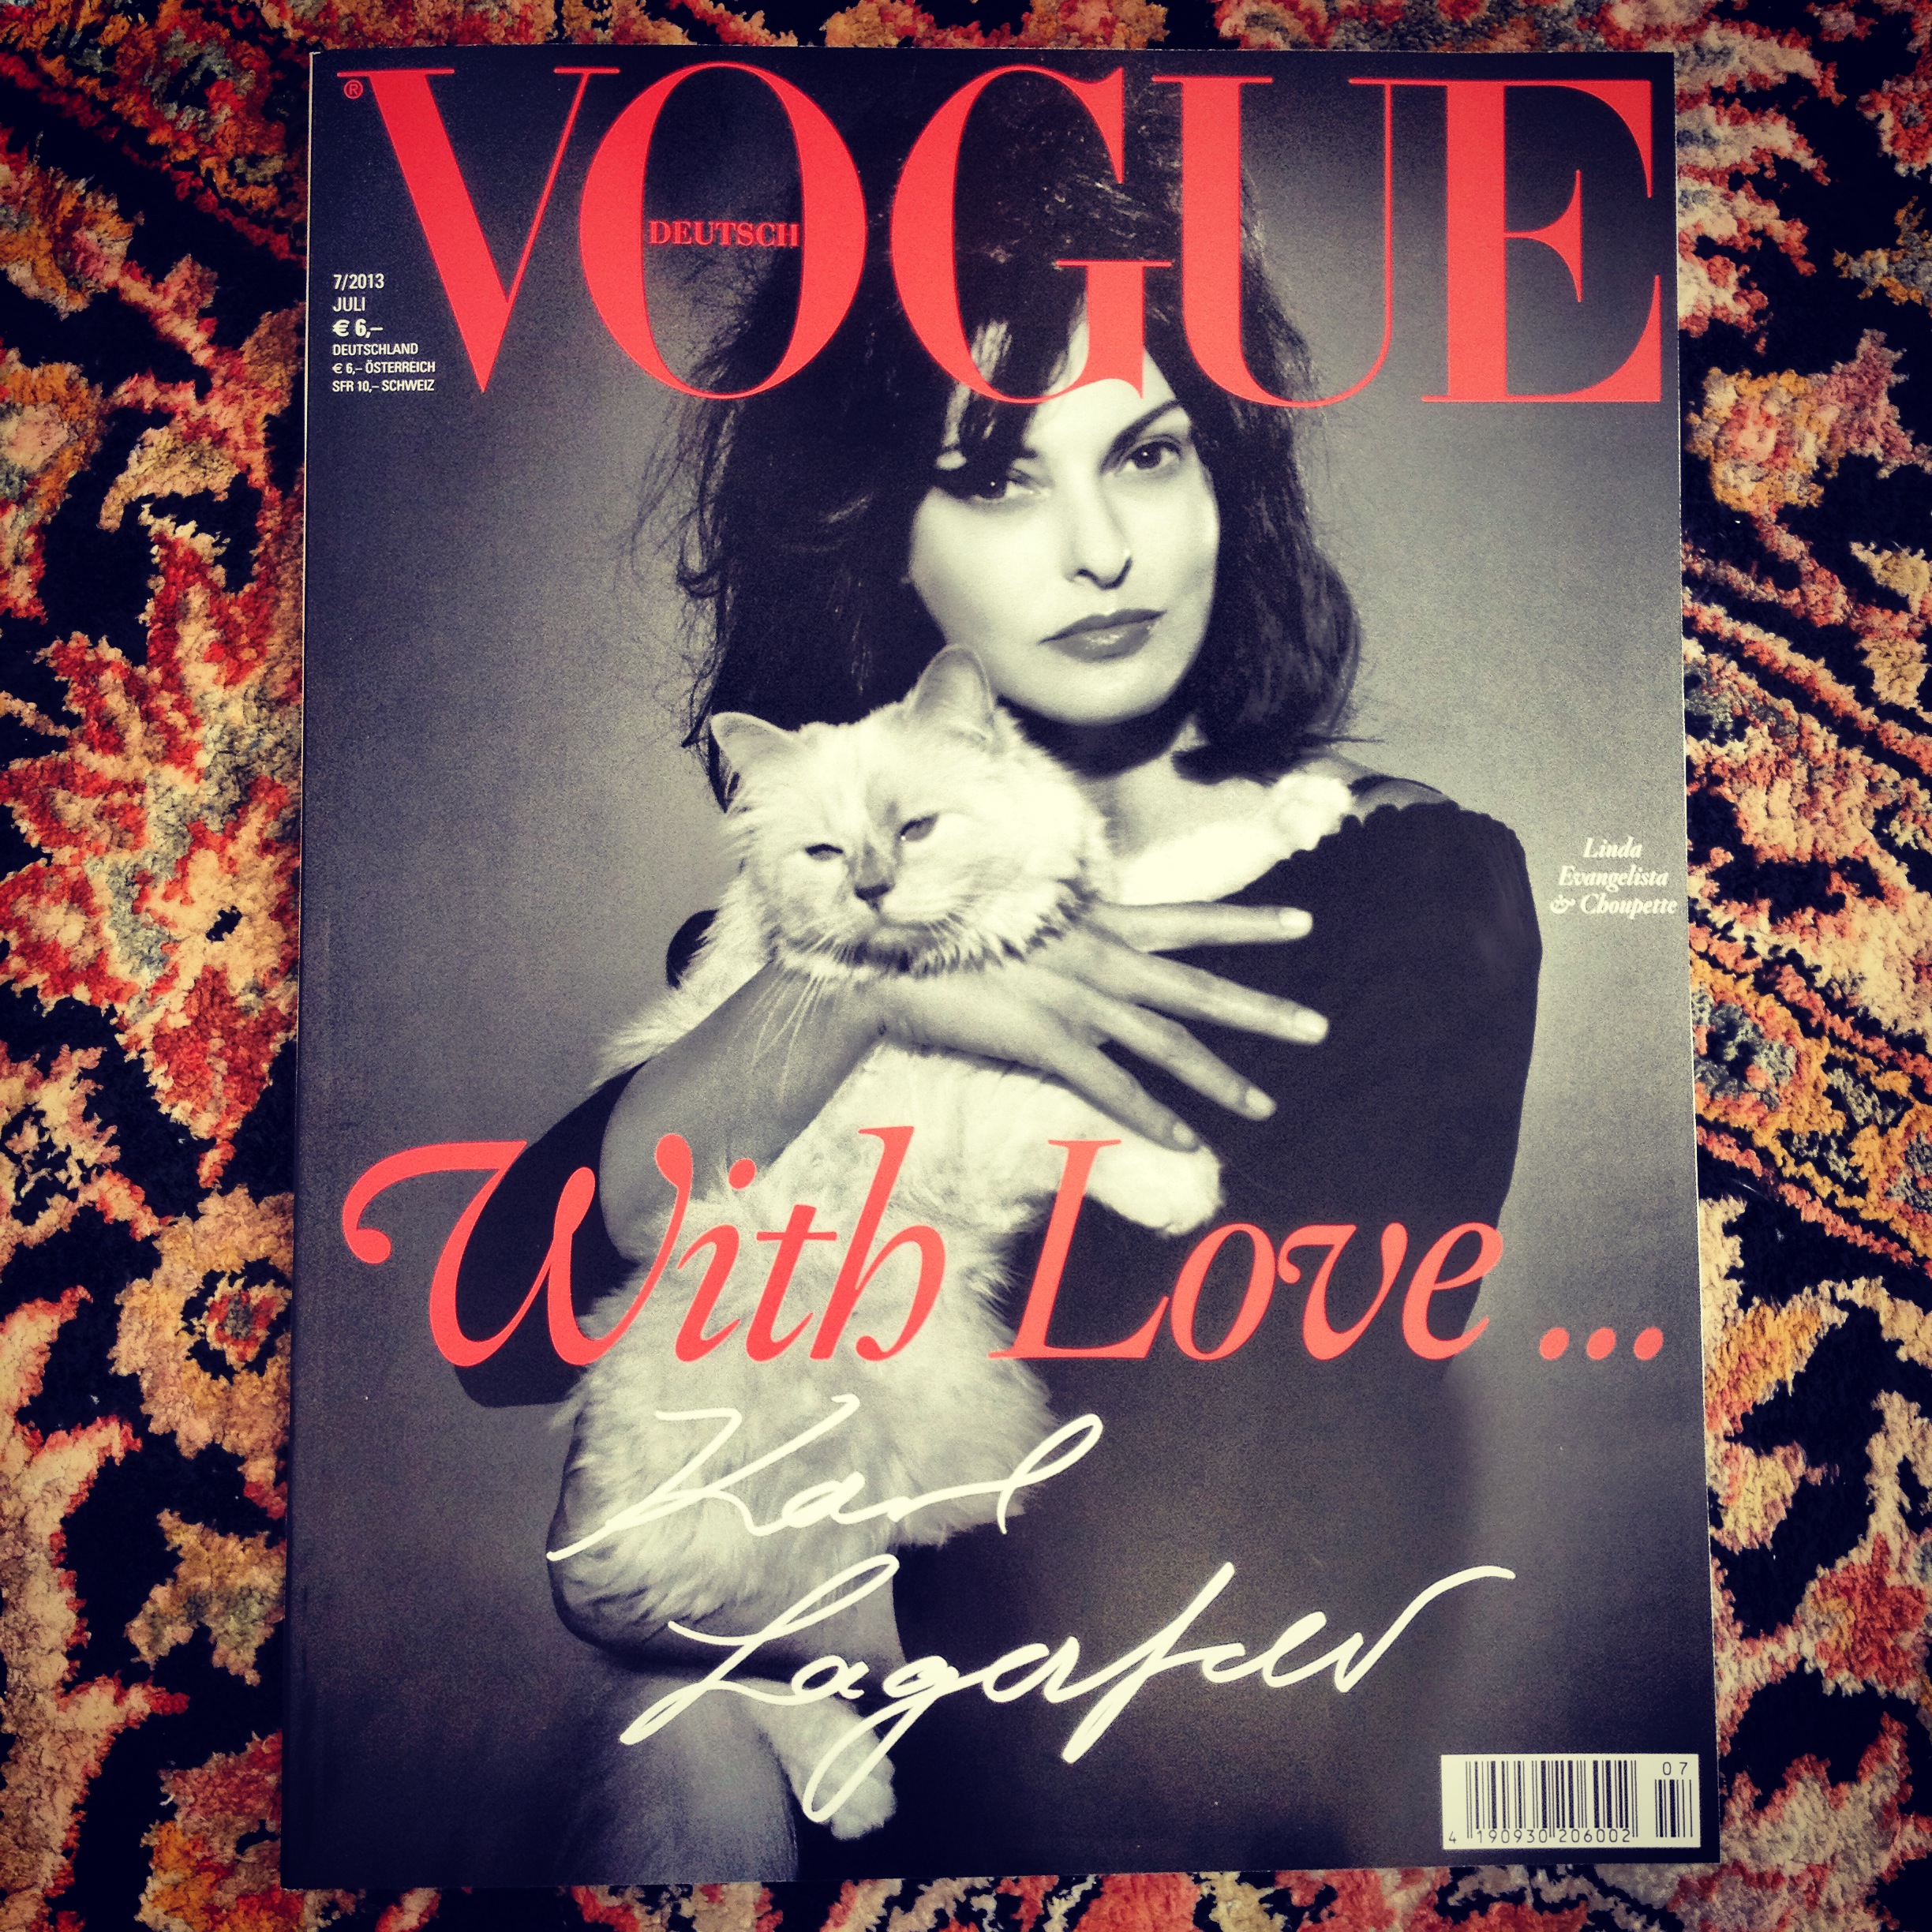 German Vogue Choupette, the cat cover star! (and other catty things) La Pulcinella